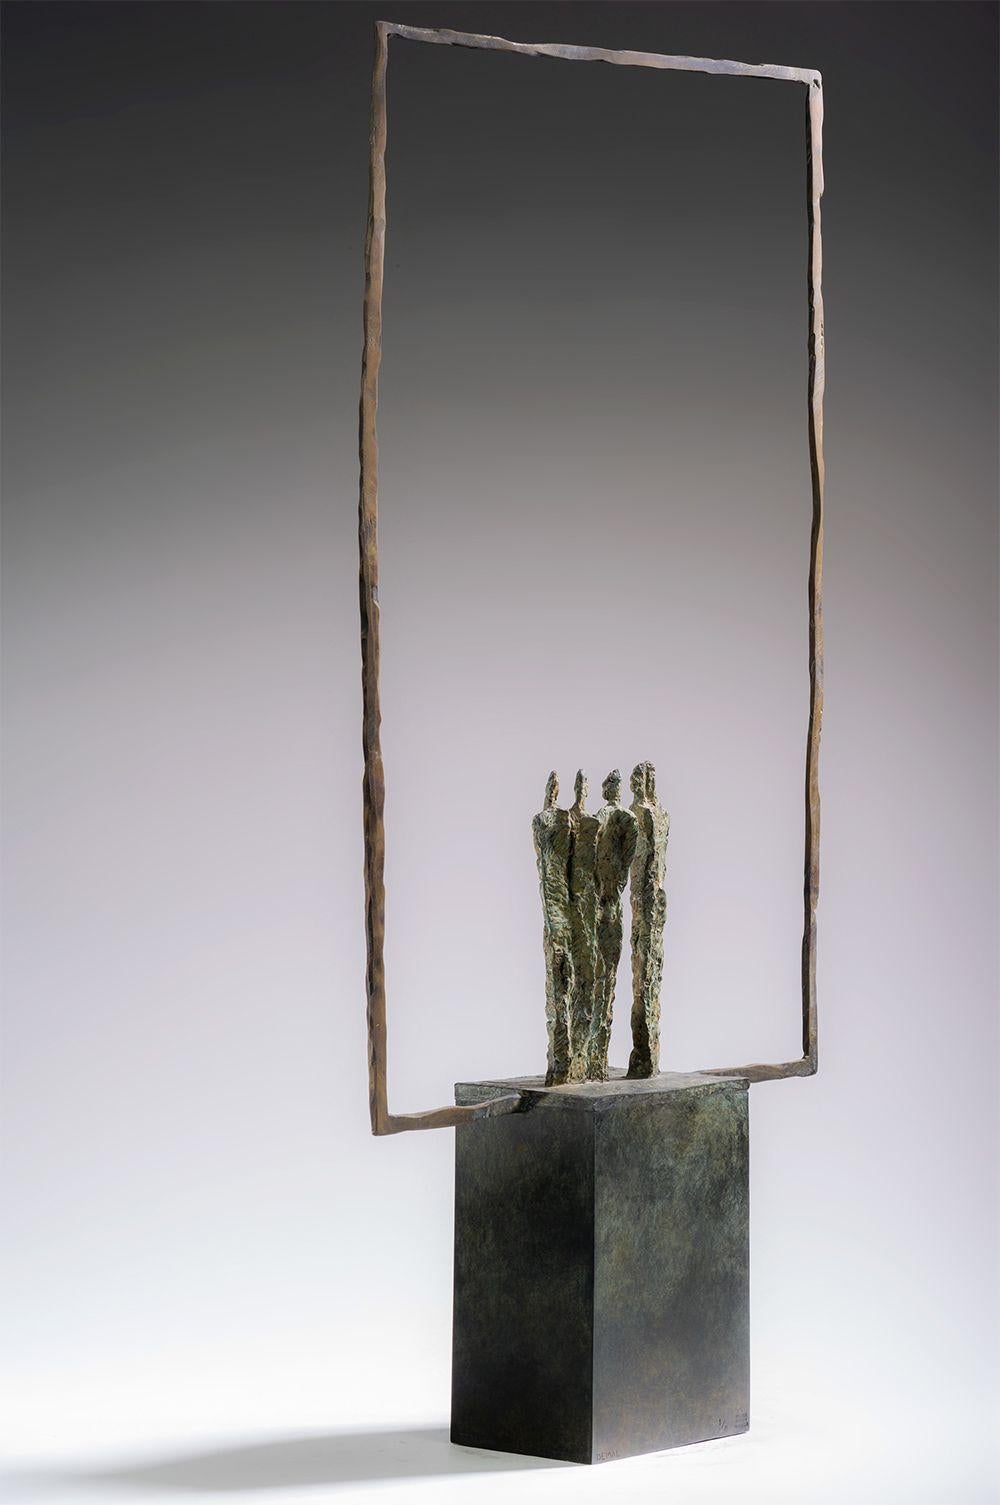 Landscape N°1 is a bronze sculpture by contemporary artist Martine Demal, it measures 78 x 35 x 10 cm (30.7 × 13.8 × 3.9 in), these dimensions include the base (the sculpture measures 59 x 23 x 10 cm and the base measures 19 x 20 x 10 cm), it is